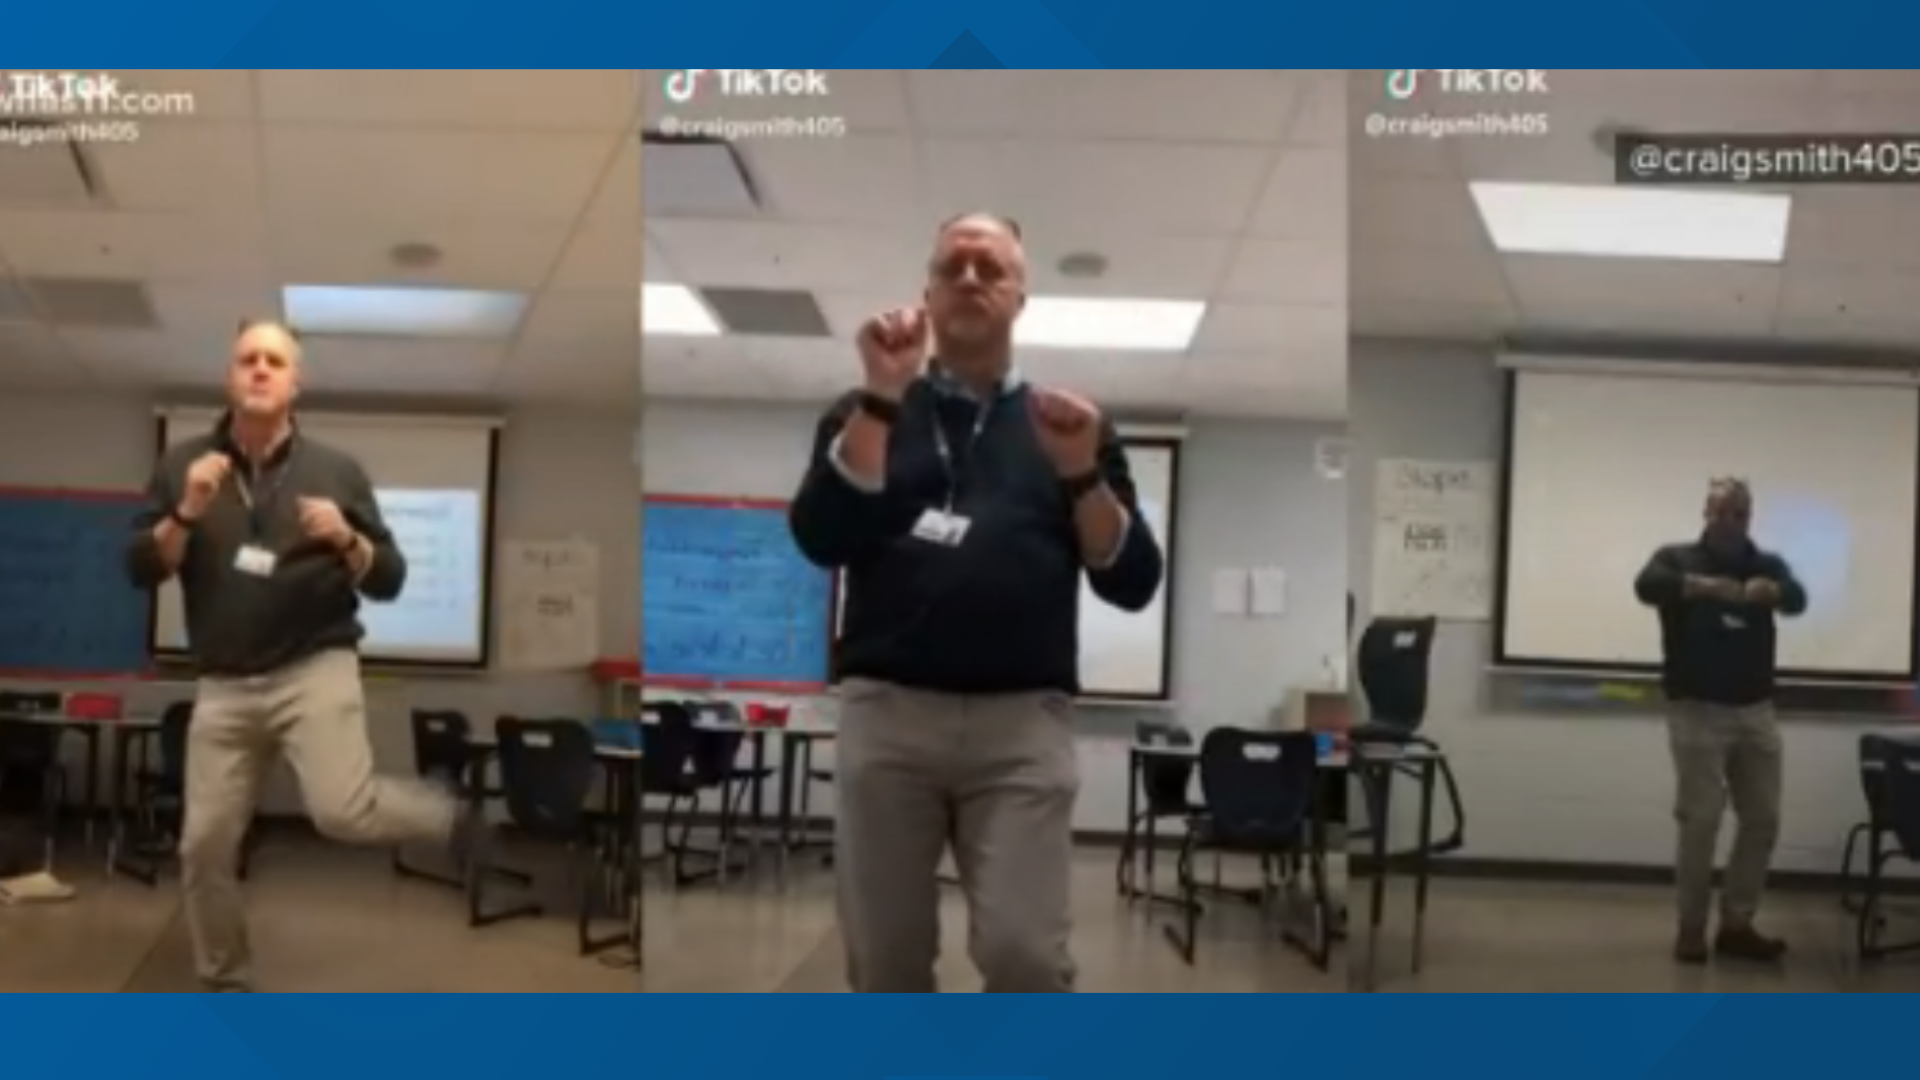 Math teacher Craig Smith's TikTok videos have gone viral. But he says he doesn't make them for the likes, follows, and shares.